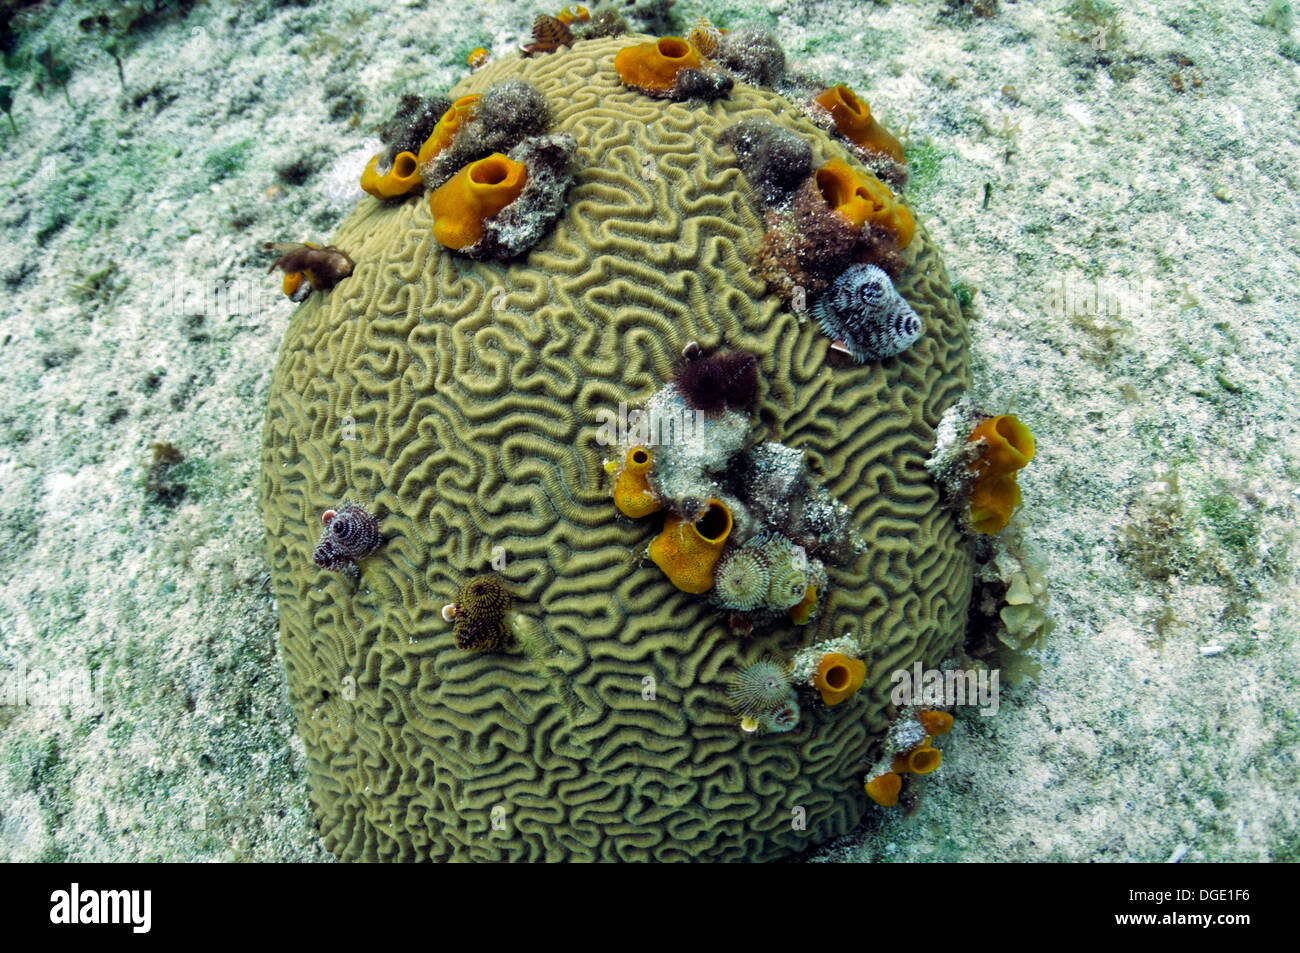 Brain coral, Faviidae family, with sponges and ascidians, Dzul-Ha reef, Cozumel, Mexico, Caribbean Stock Photo